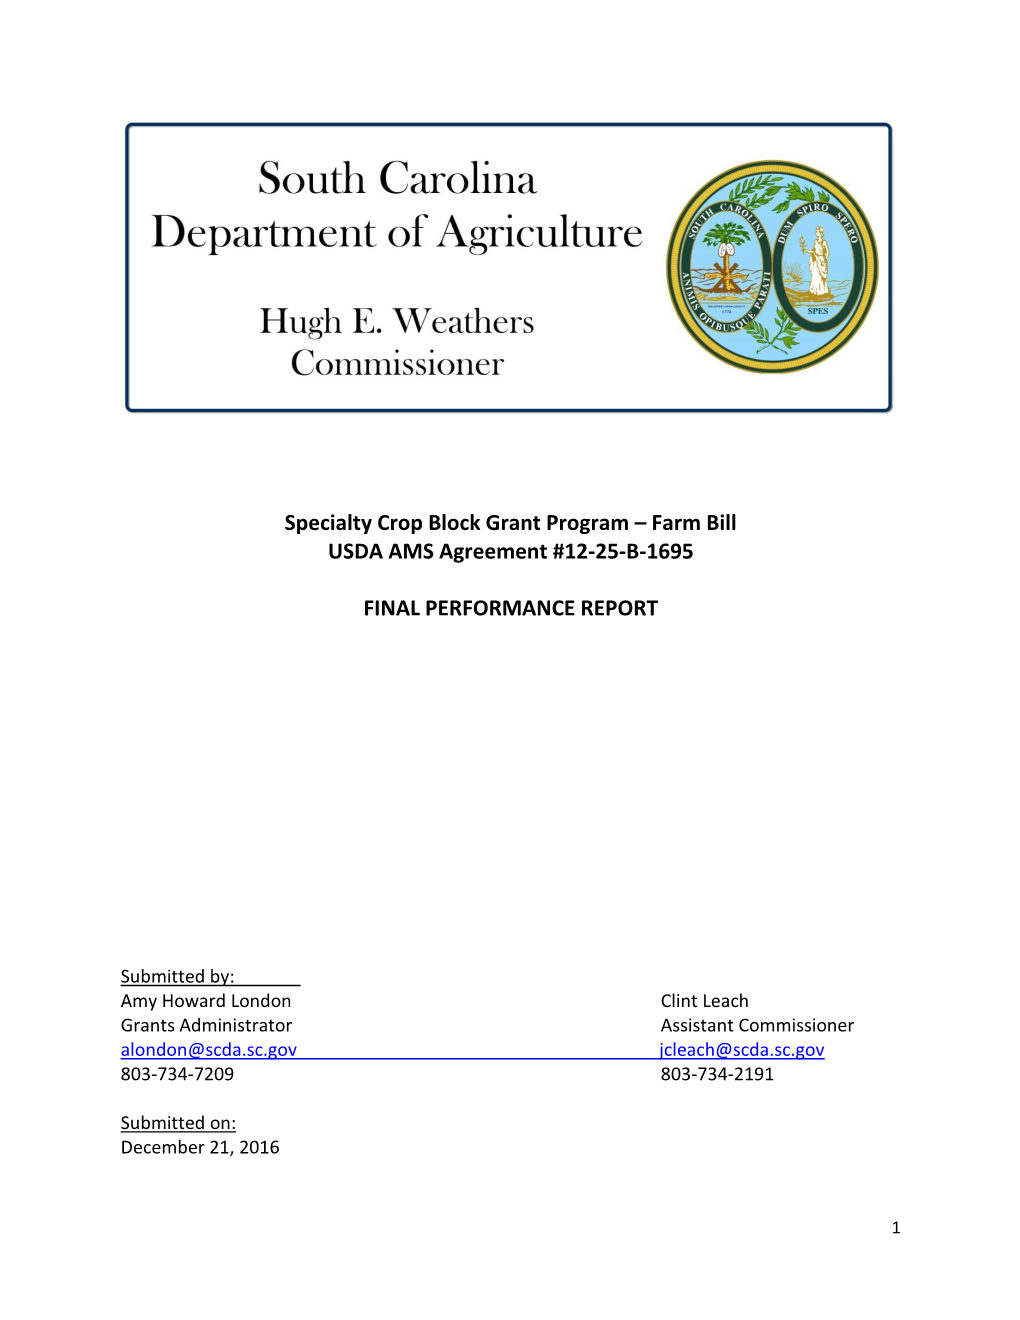 South Carolina Department of Agriculture; Marketing Division and the Public Information Division